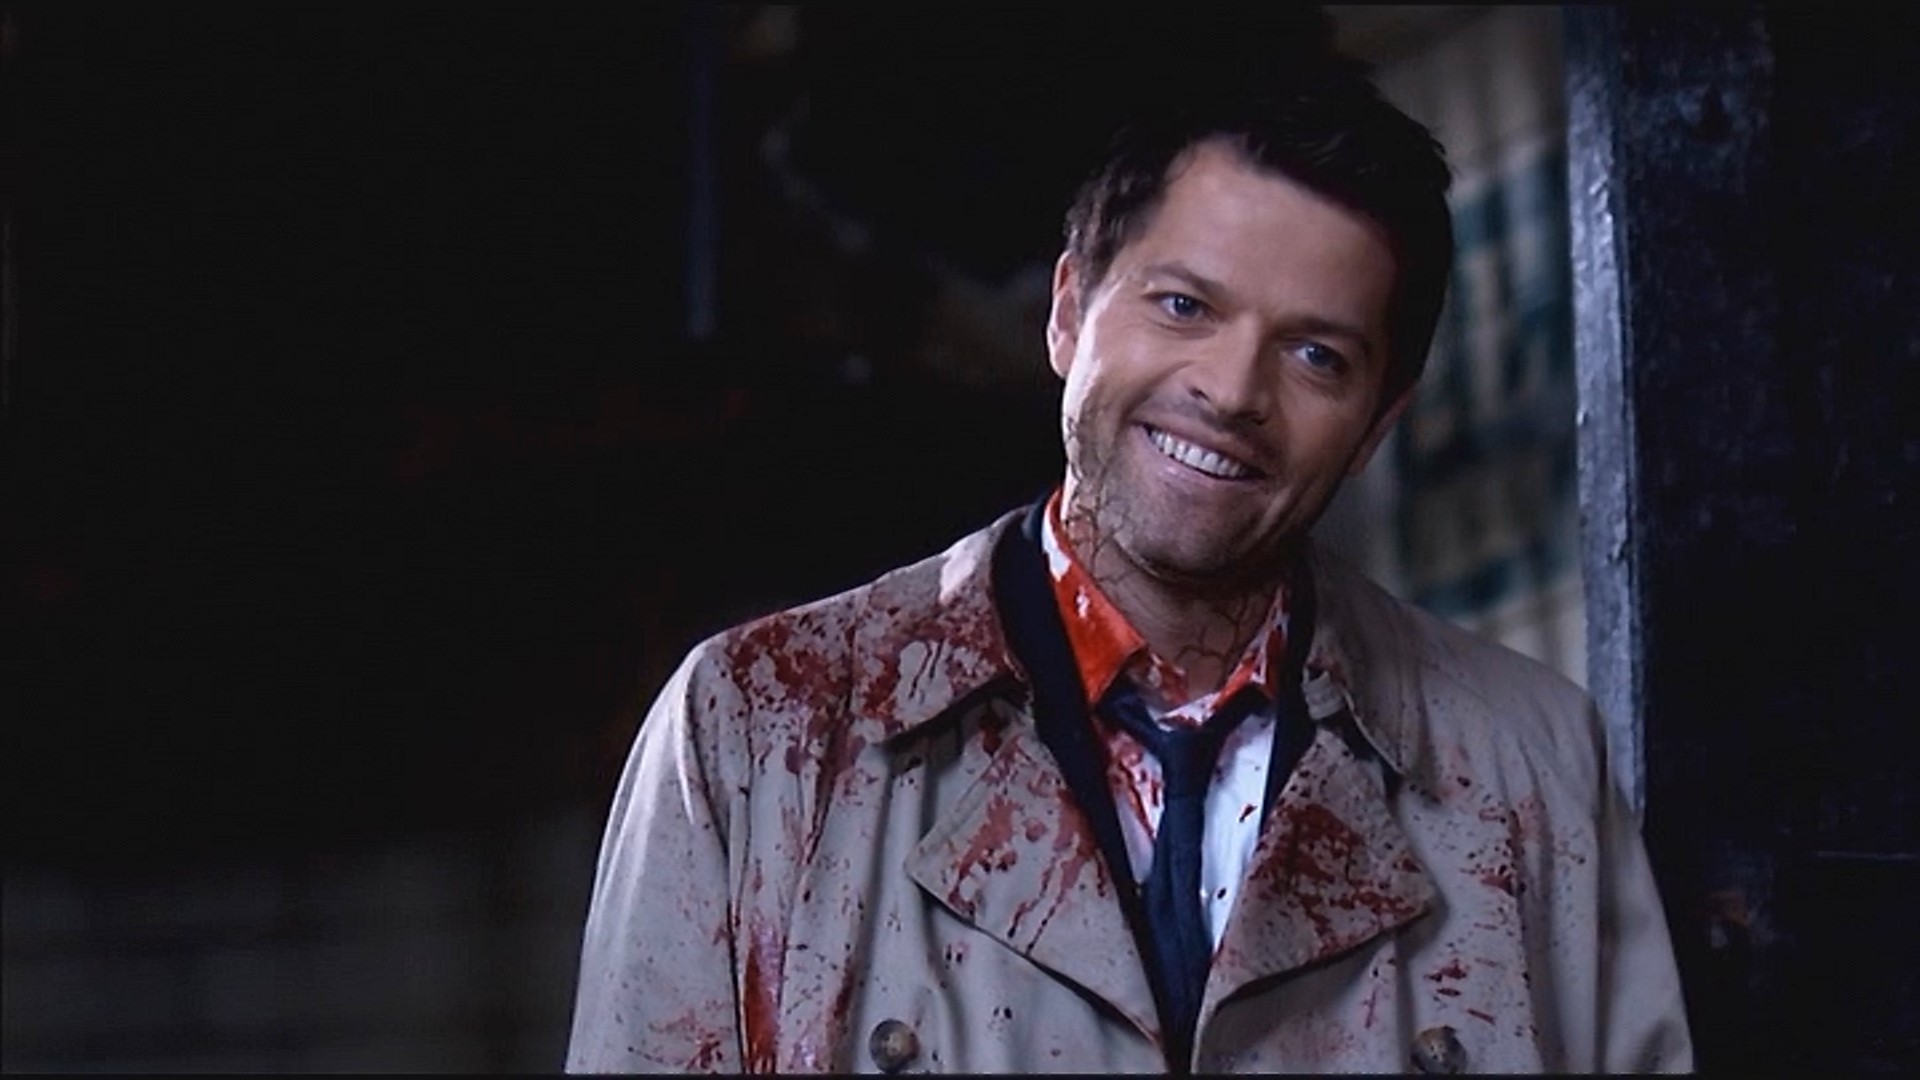 Bsically, buy a classic Castiel trenchcoat and ruin it. Must have accessory Black goo